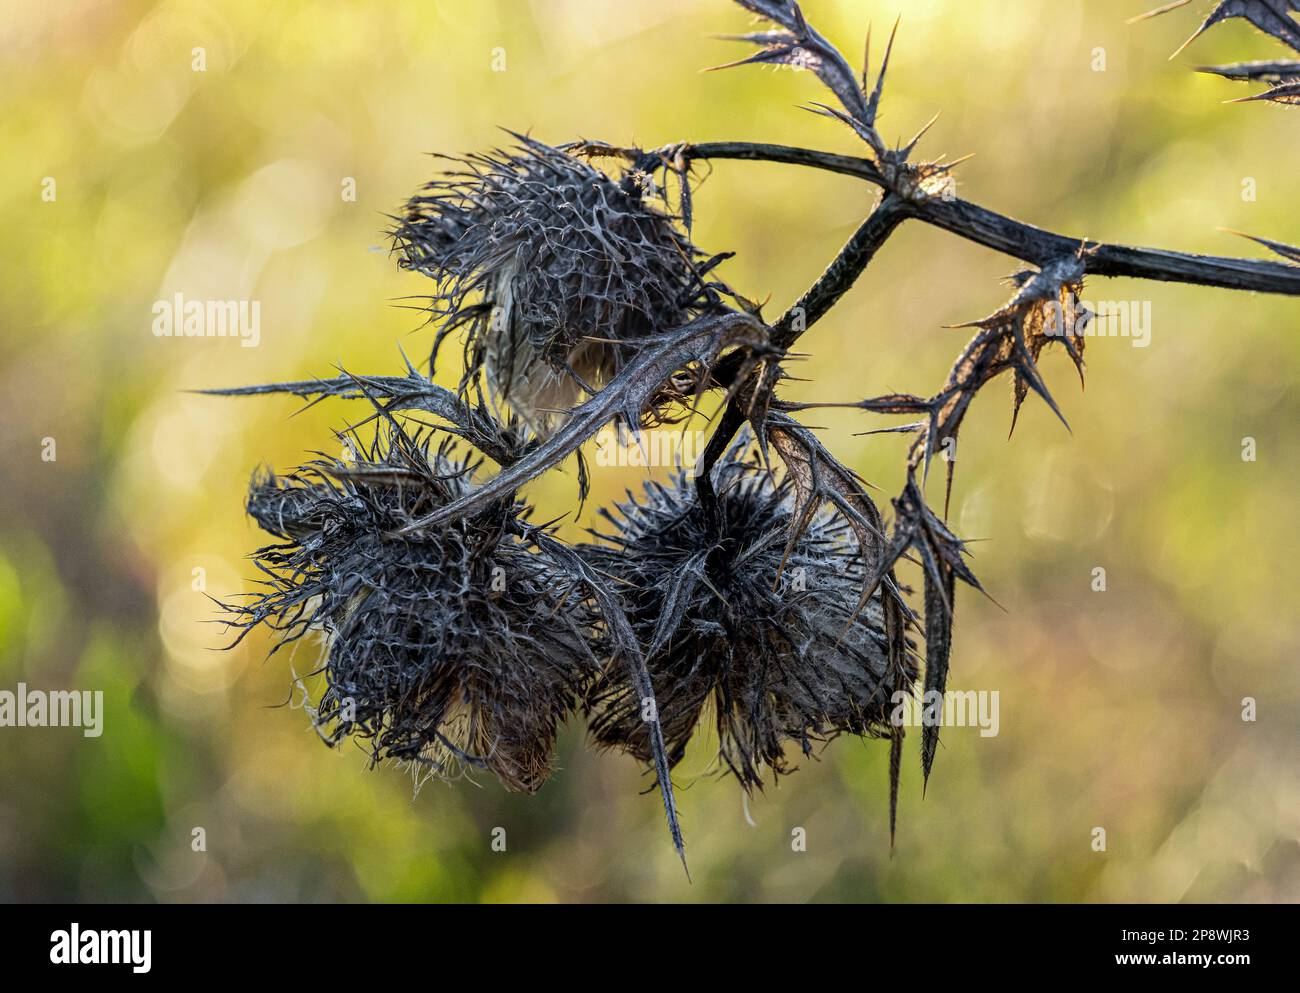 Dry thistle on the field and blurred background Stock Photo